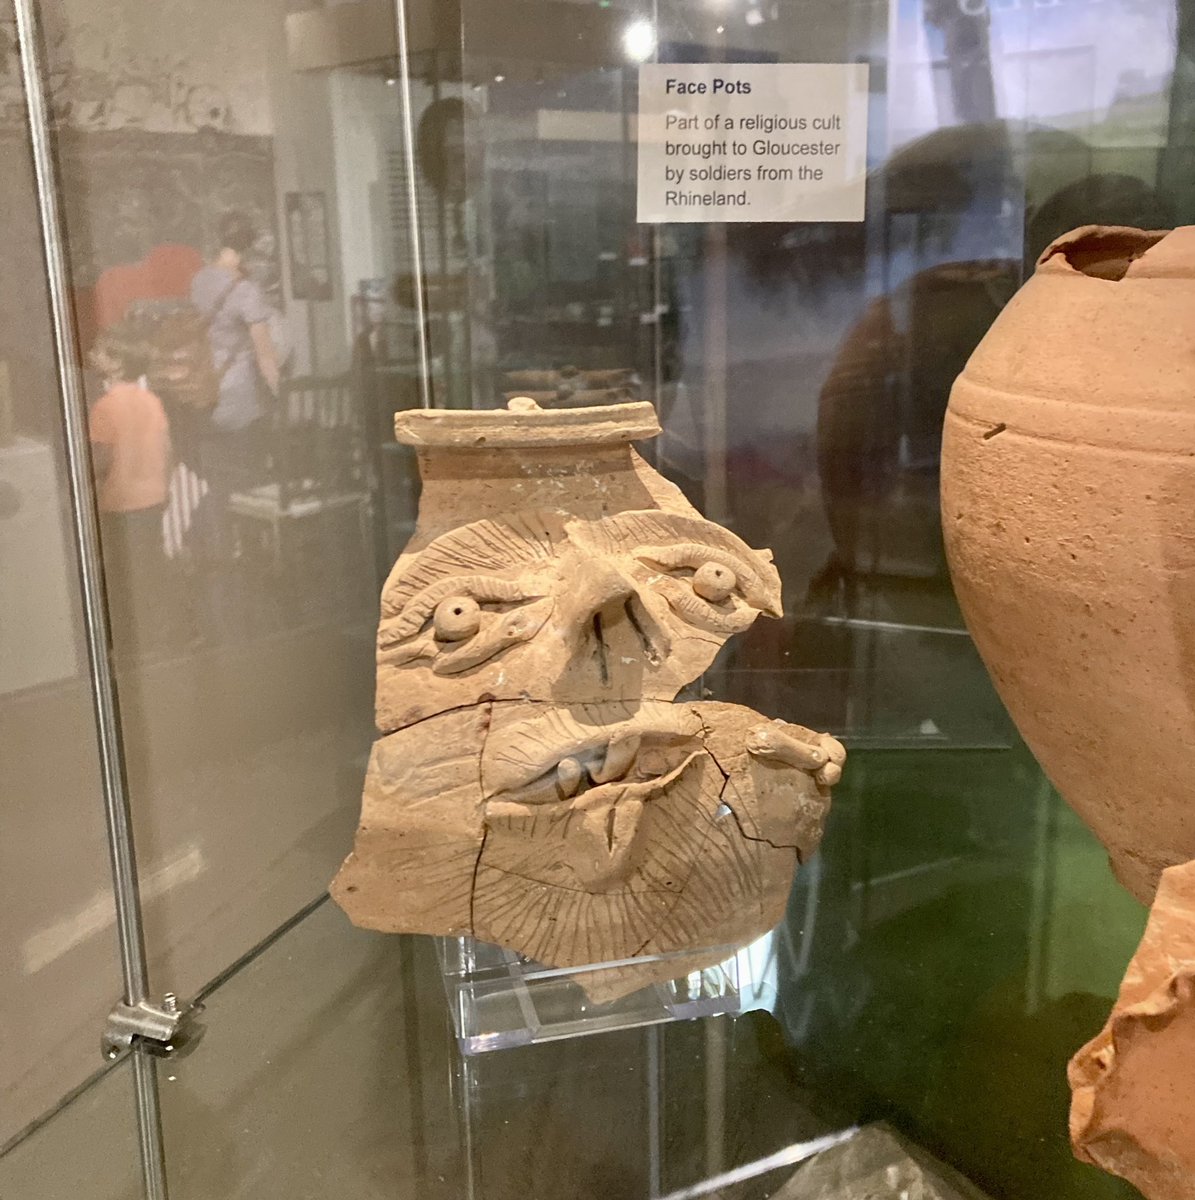 As it’s #Friday13th here’s the scariest thing I’ve seen in a museum and possibly in life 😂 a Roman face pot from Glevum @MuseumOfGlos #FindsFriday #romanarchaeology #creepy #spooky #museums